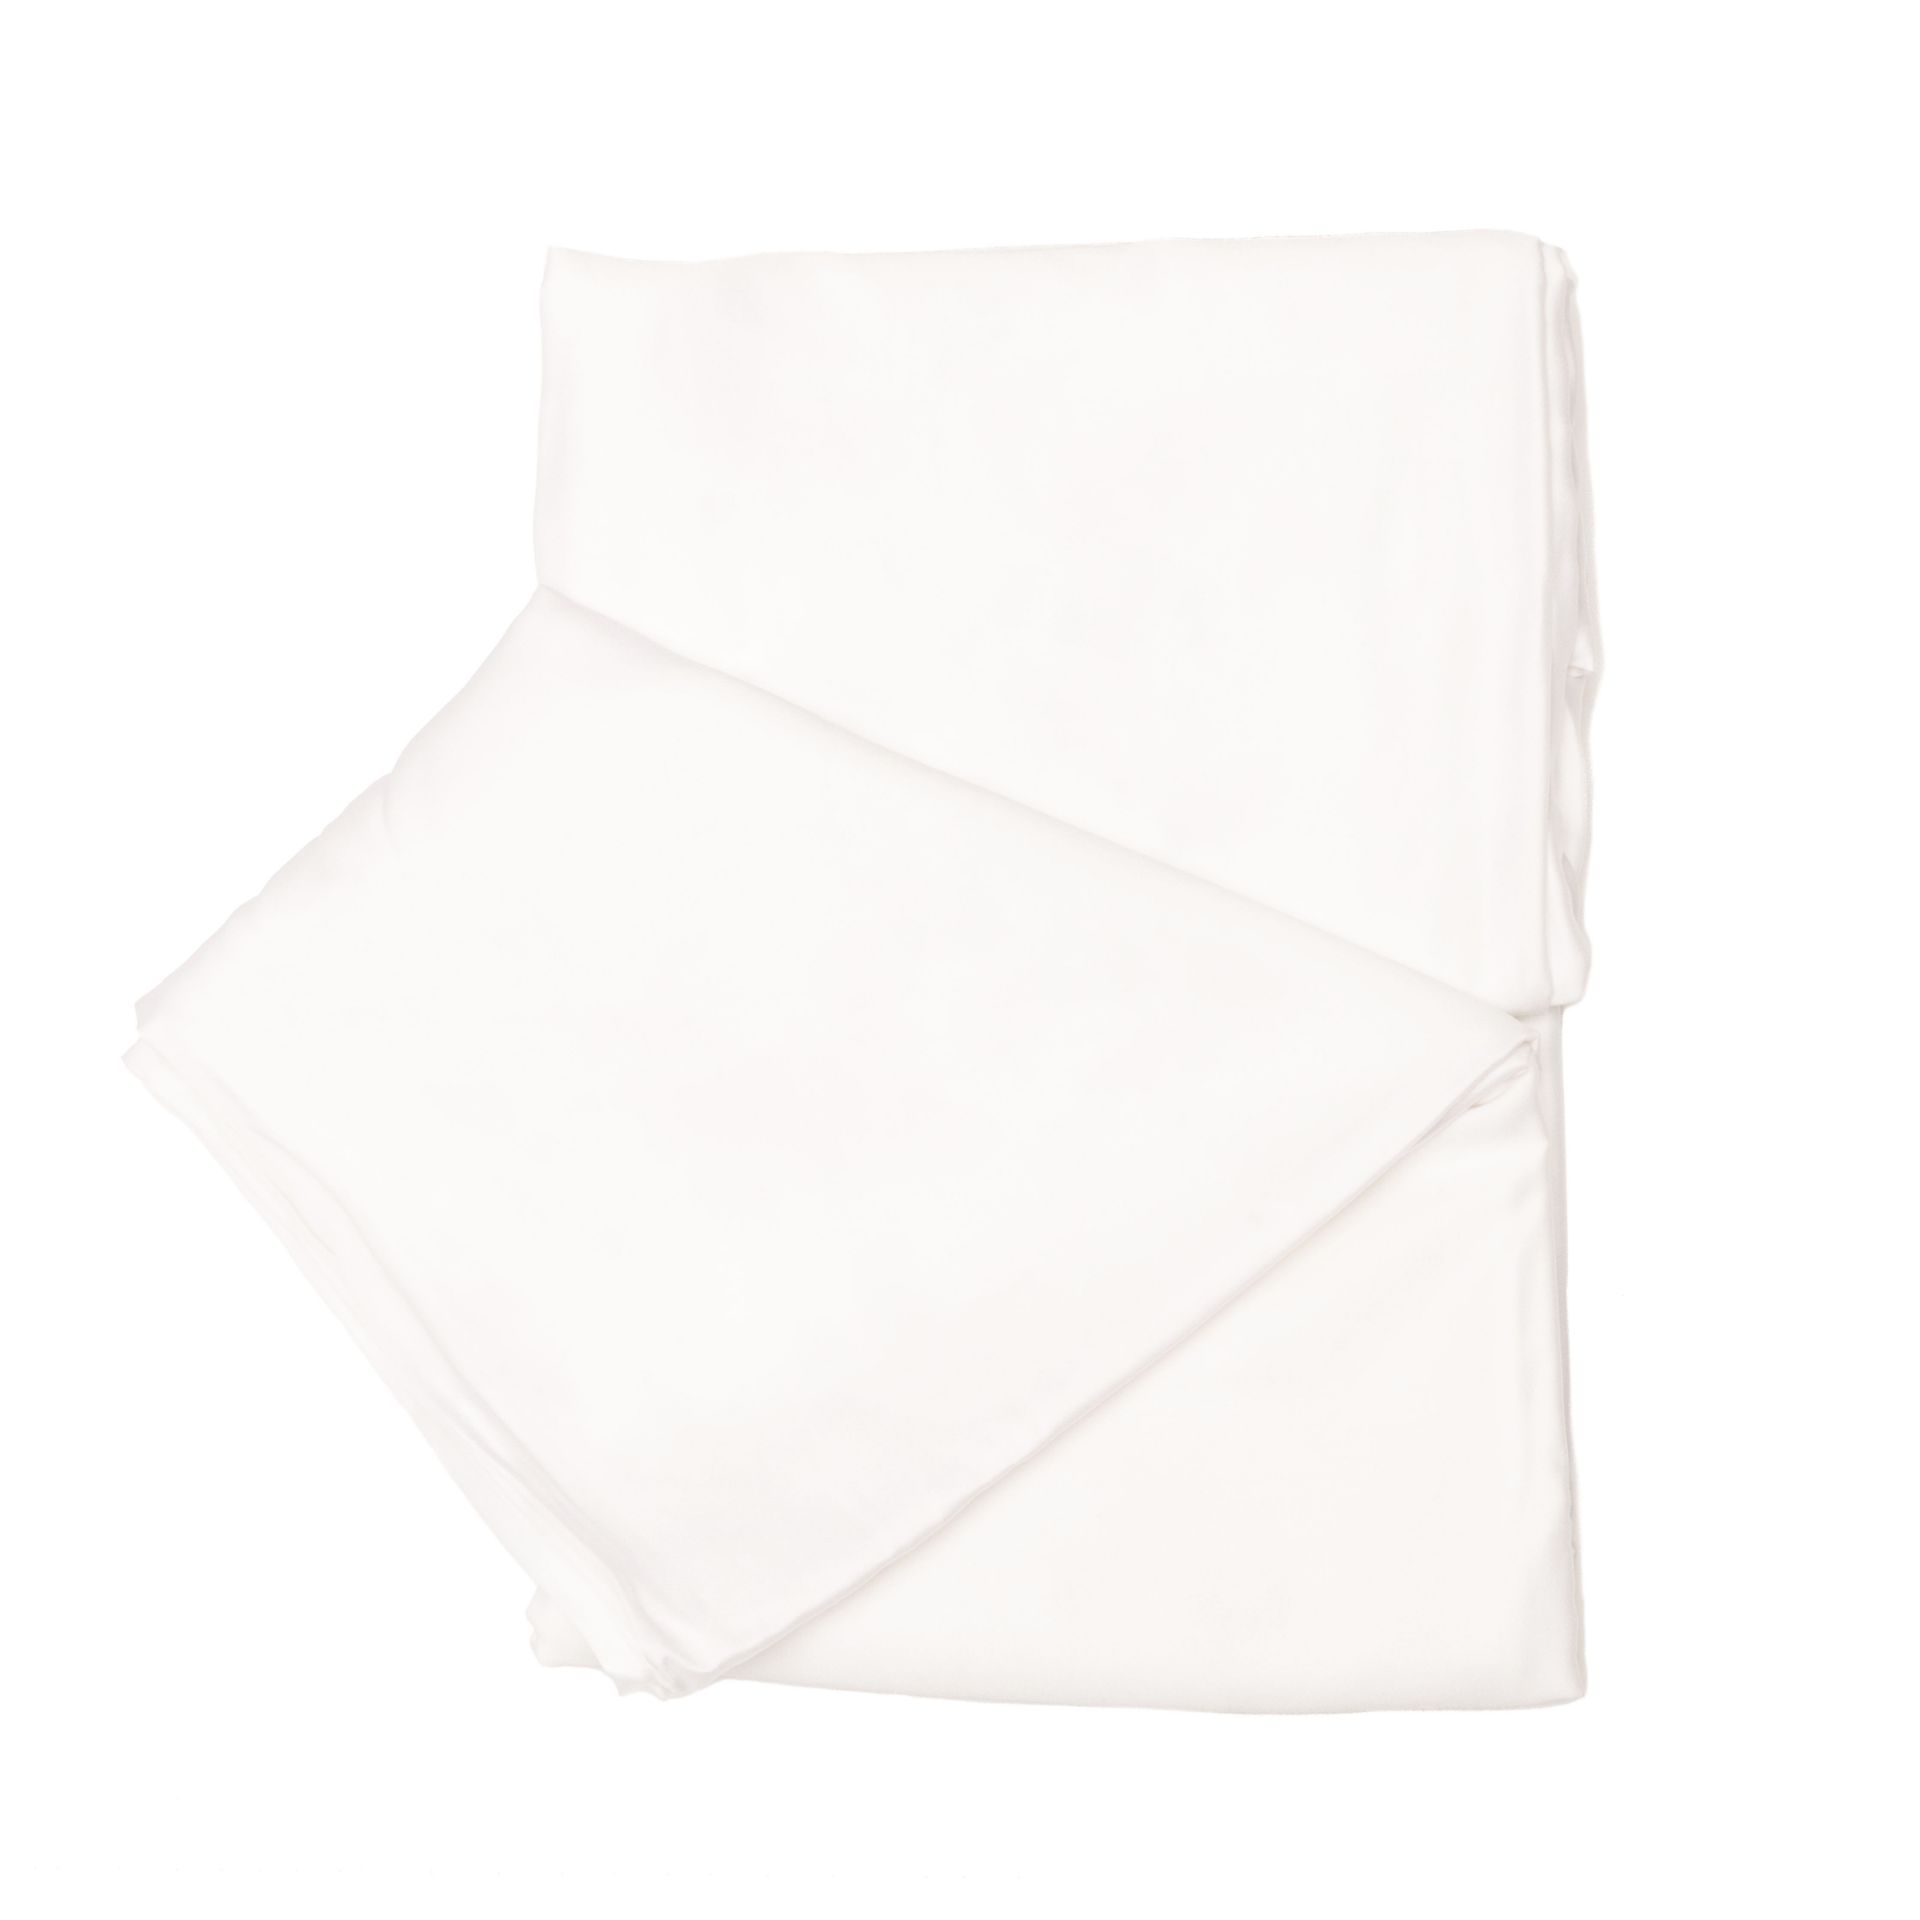 6 x White Bamboo Bed Linen Set (Double) - Duvet Cover, Fitted Sheet, Flat Sheet, 2 Pillowcases - Image 7 of 9